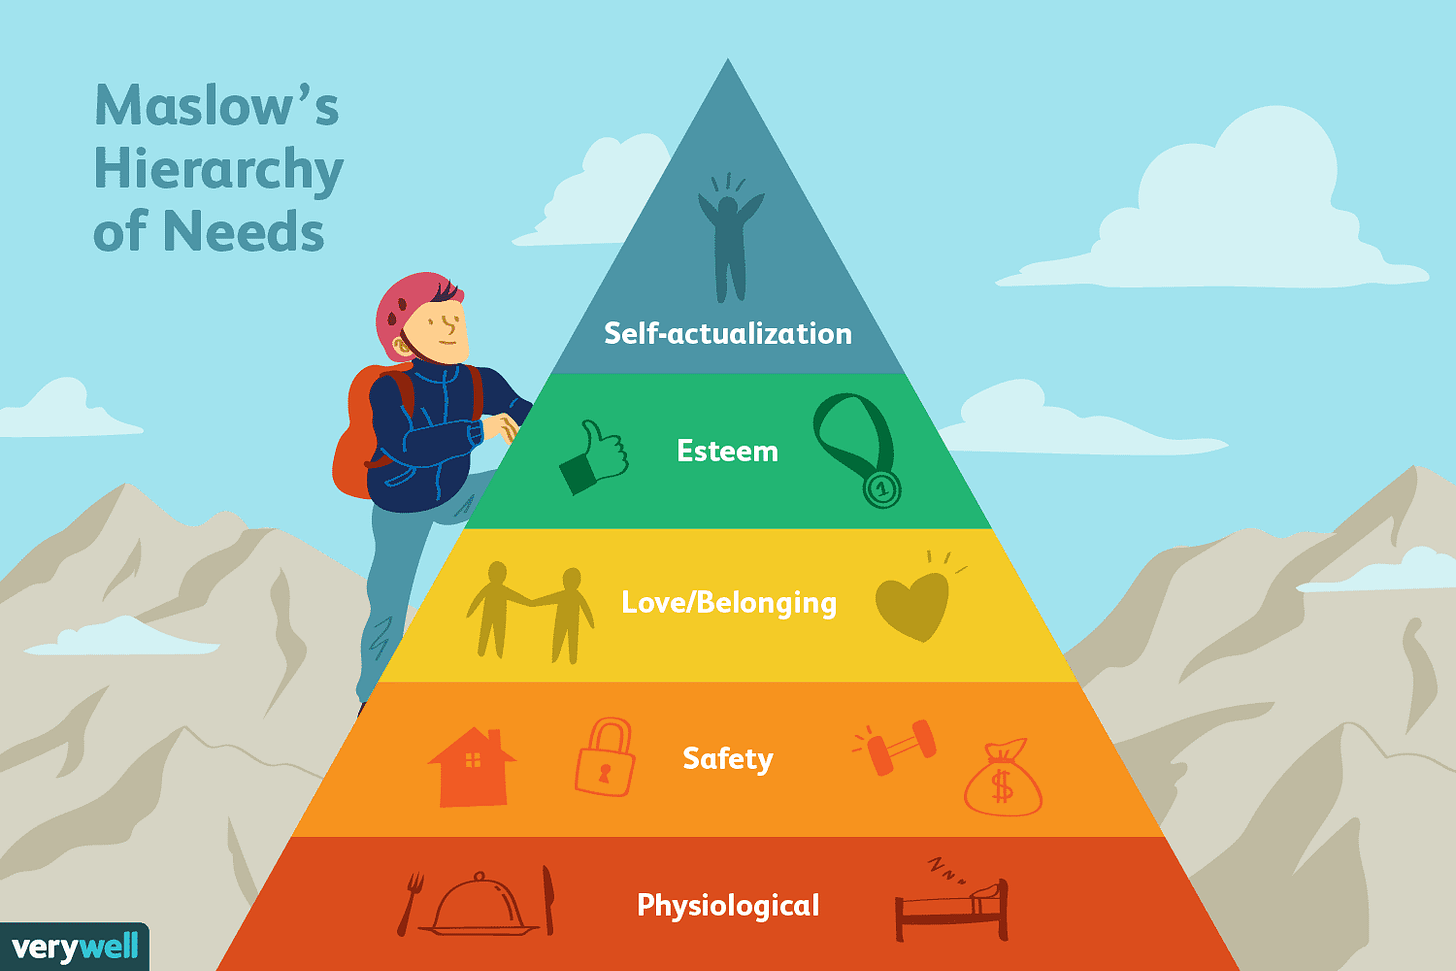 Maslow's hierarchy of needs from verywell.com